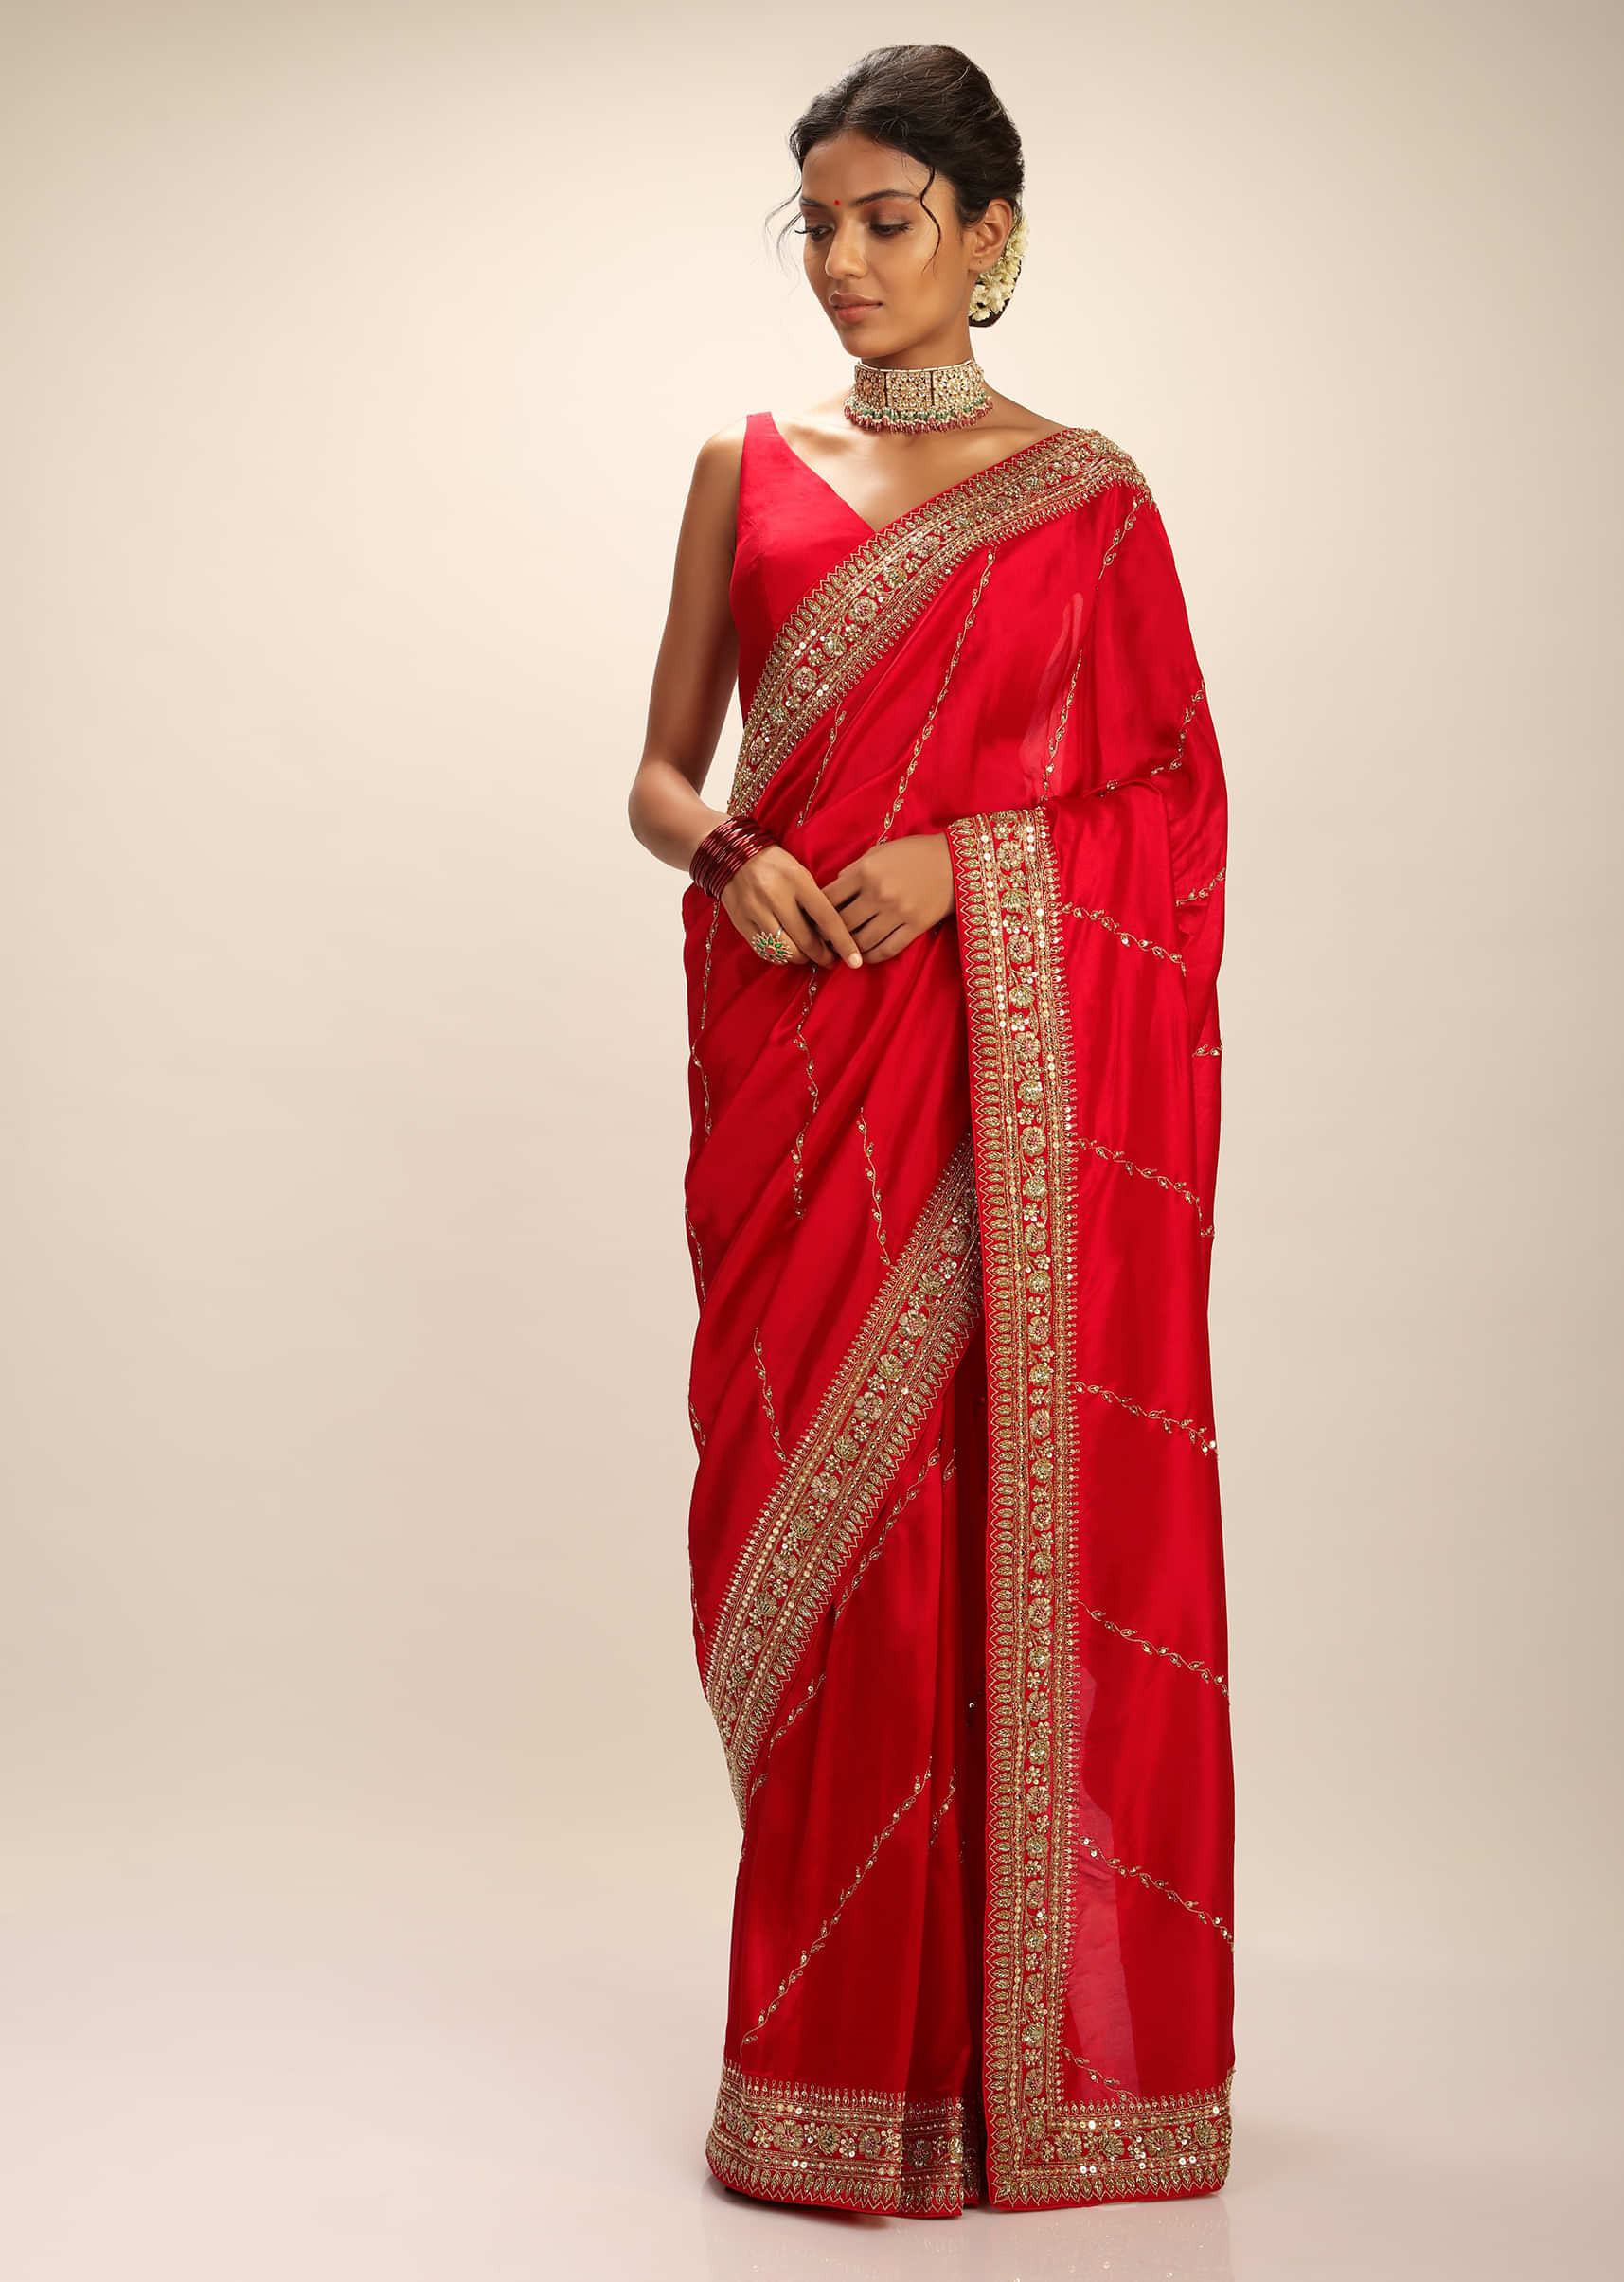 True Red Purple Saree In Dupion Silk With Hand Embroidered Embroidered Stripes And Floral Border 